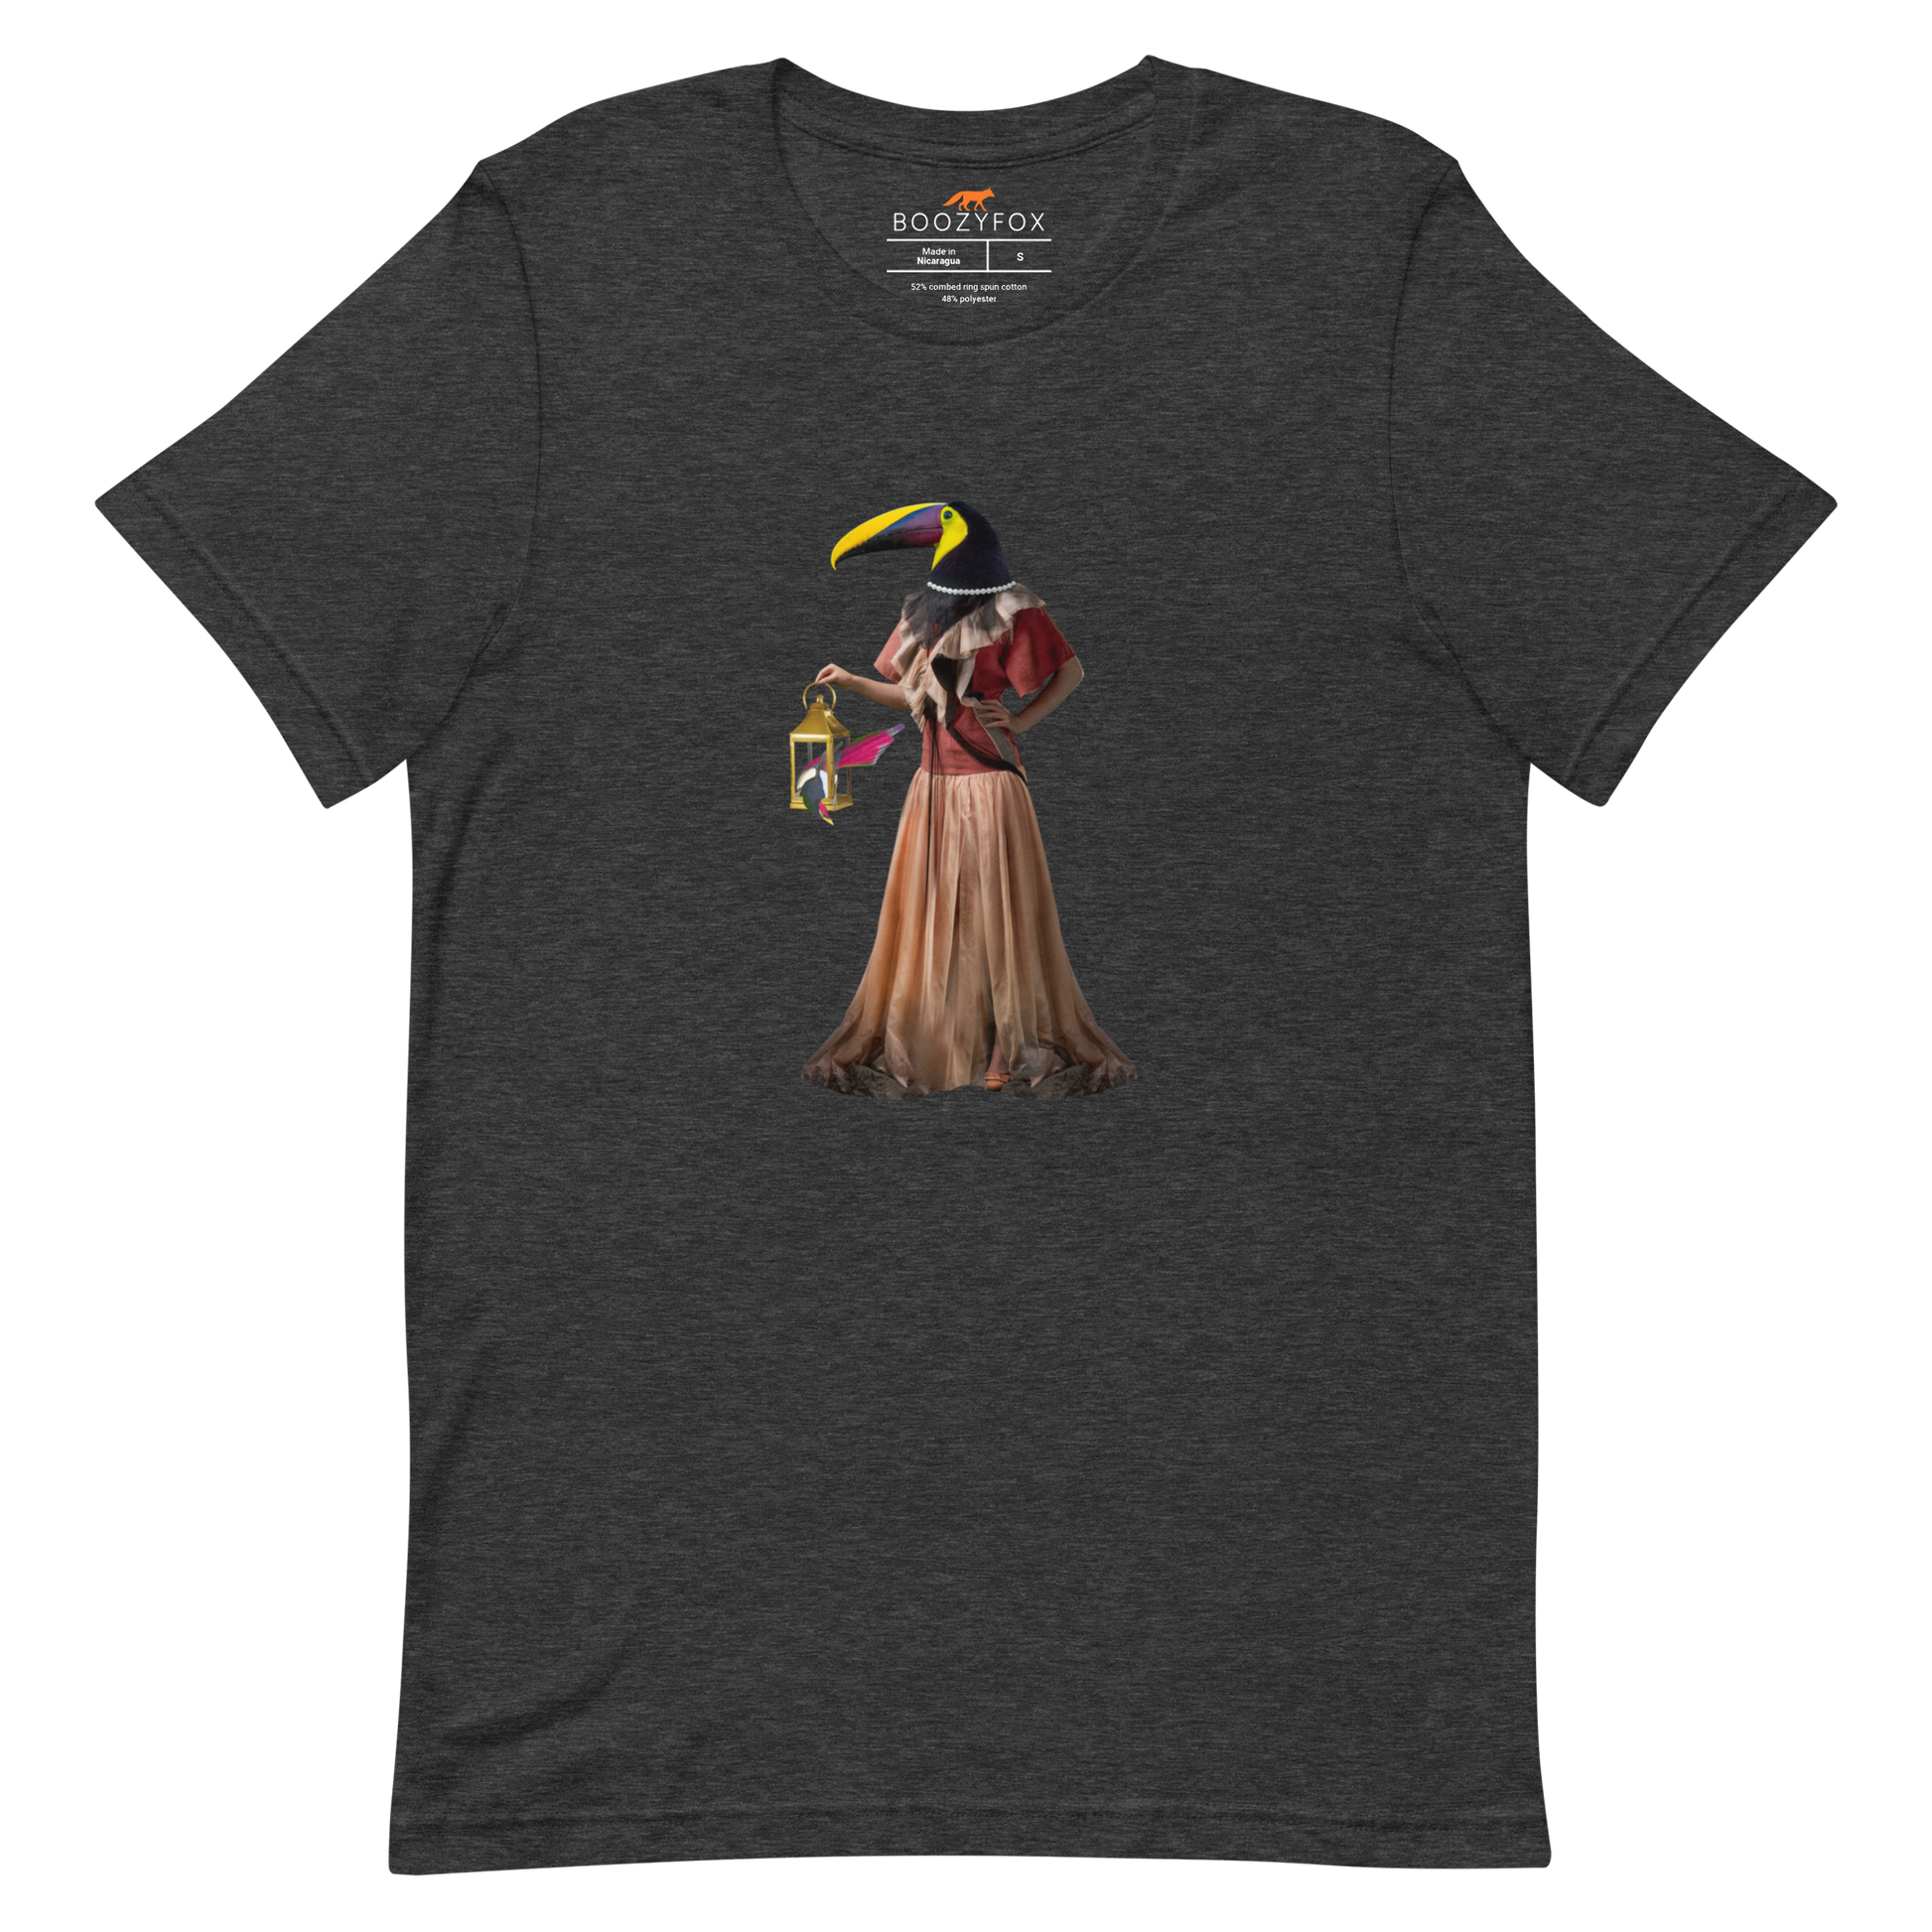 Dark Grey Heather Premium Toucan T-Shirt featuring an Anthropomorphic Toucan graphic on the chest - Funny Graphic Toucan Tees - Boozy Fox